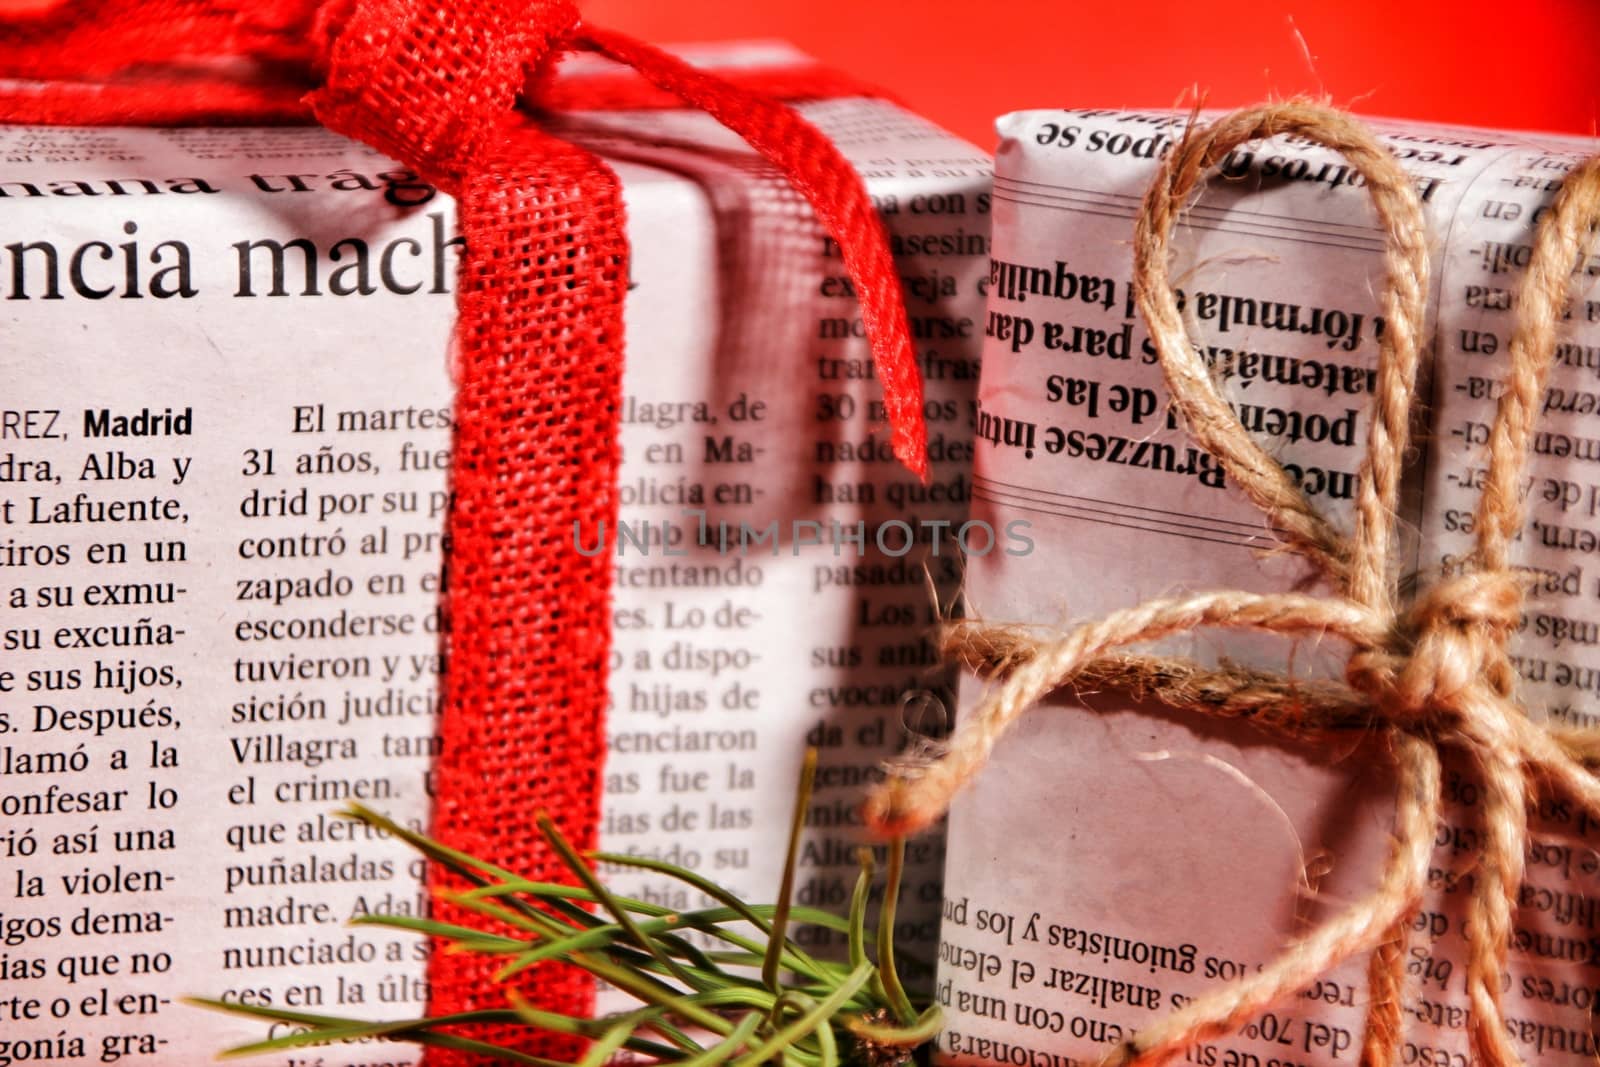 Gifts wrapped in old newspaper on red background by soniabonet